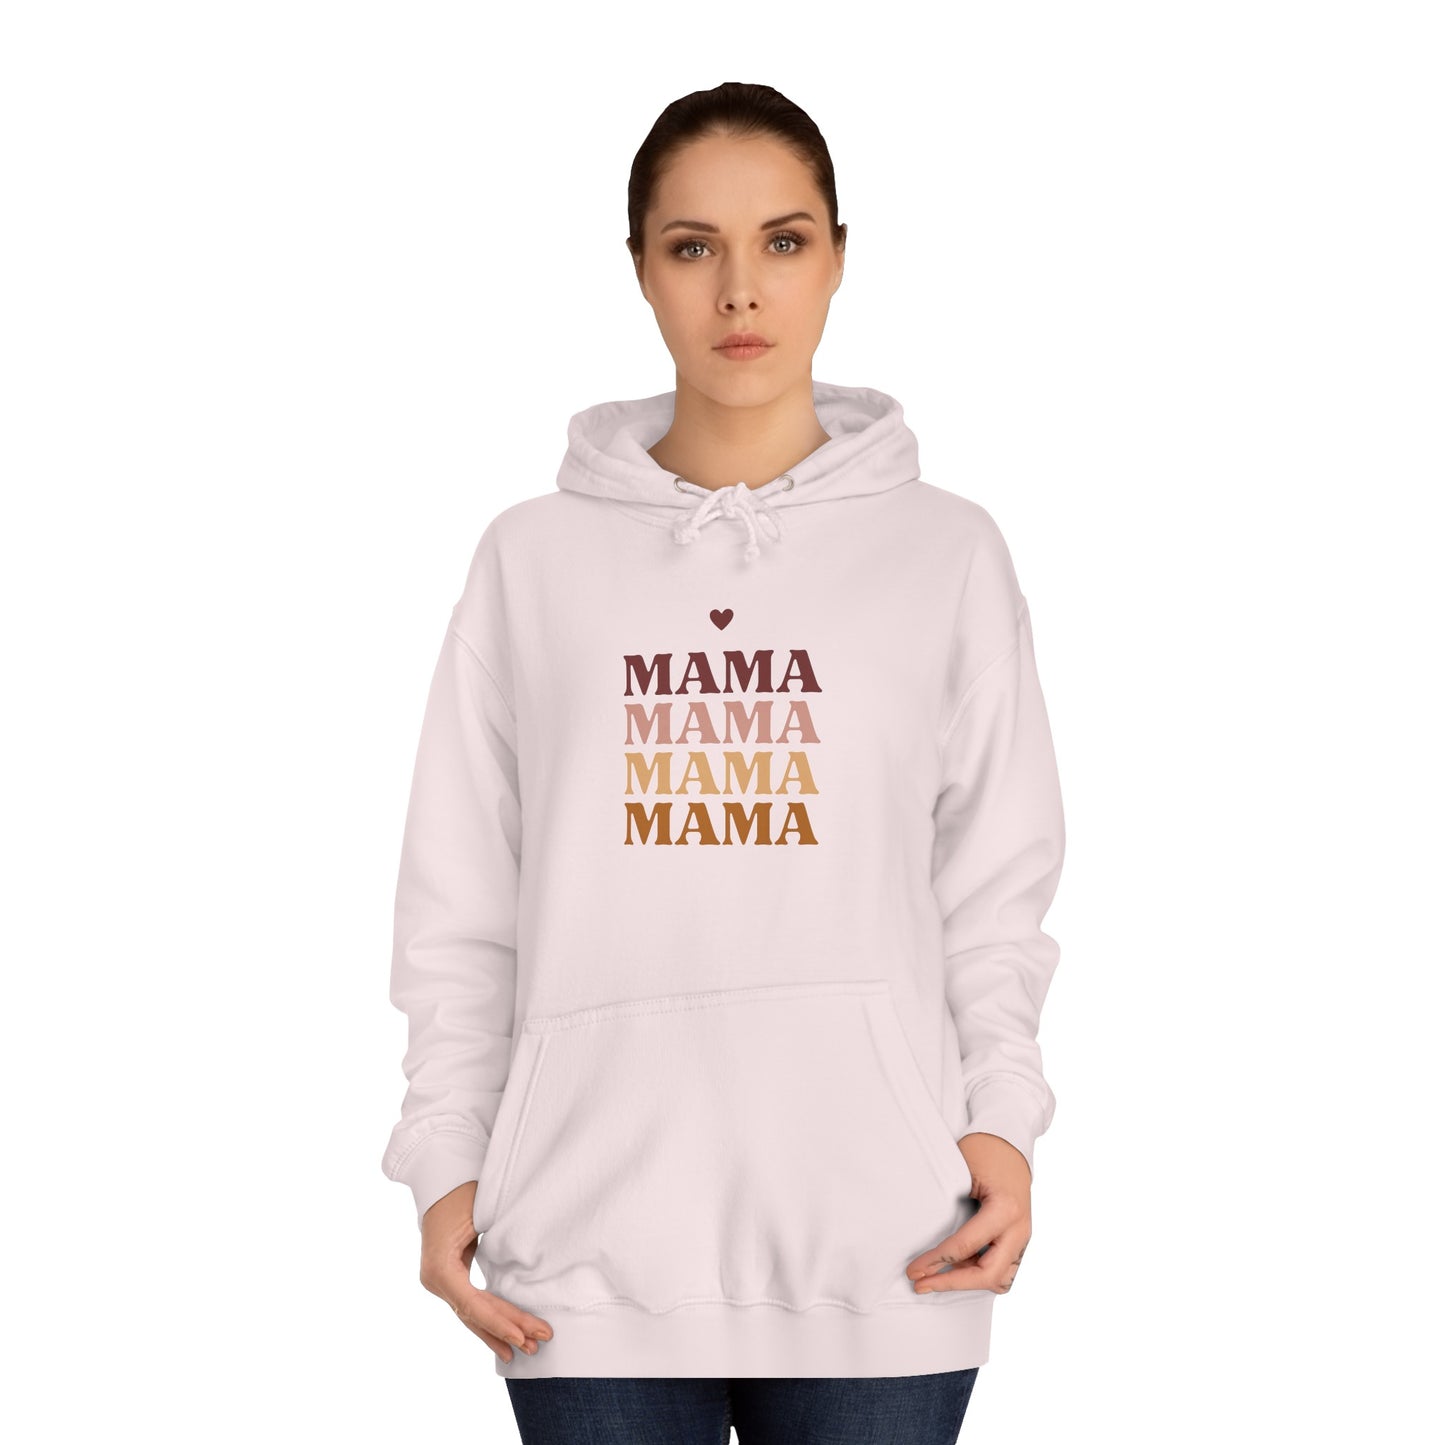 Personalized Mom-Themed Hoodie!